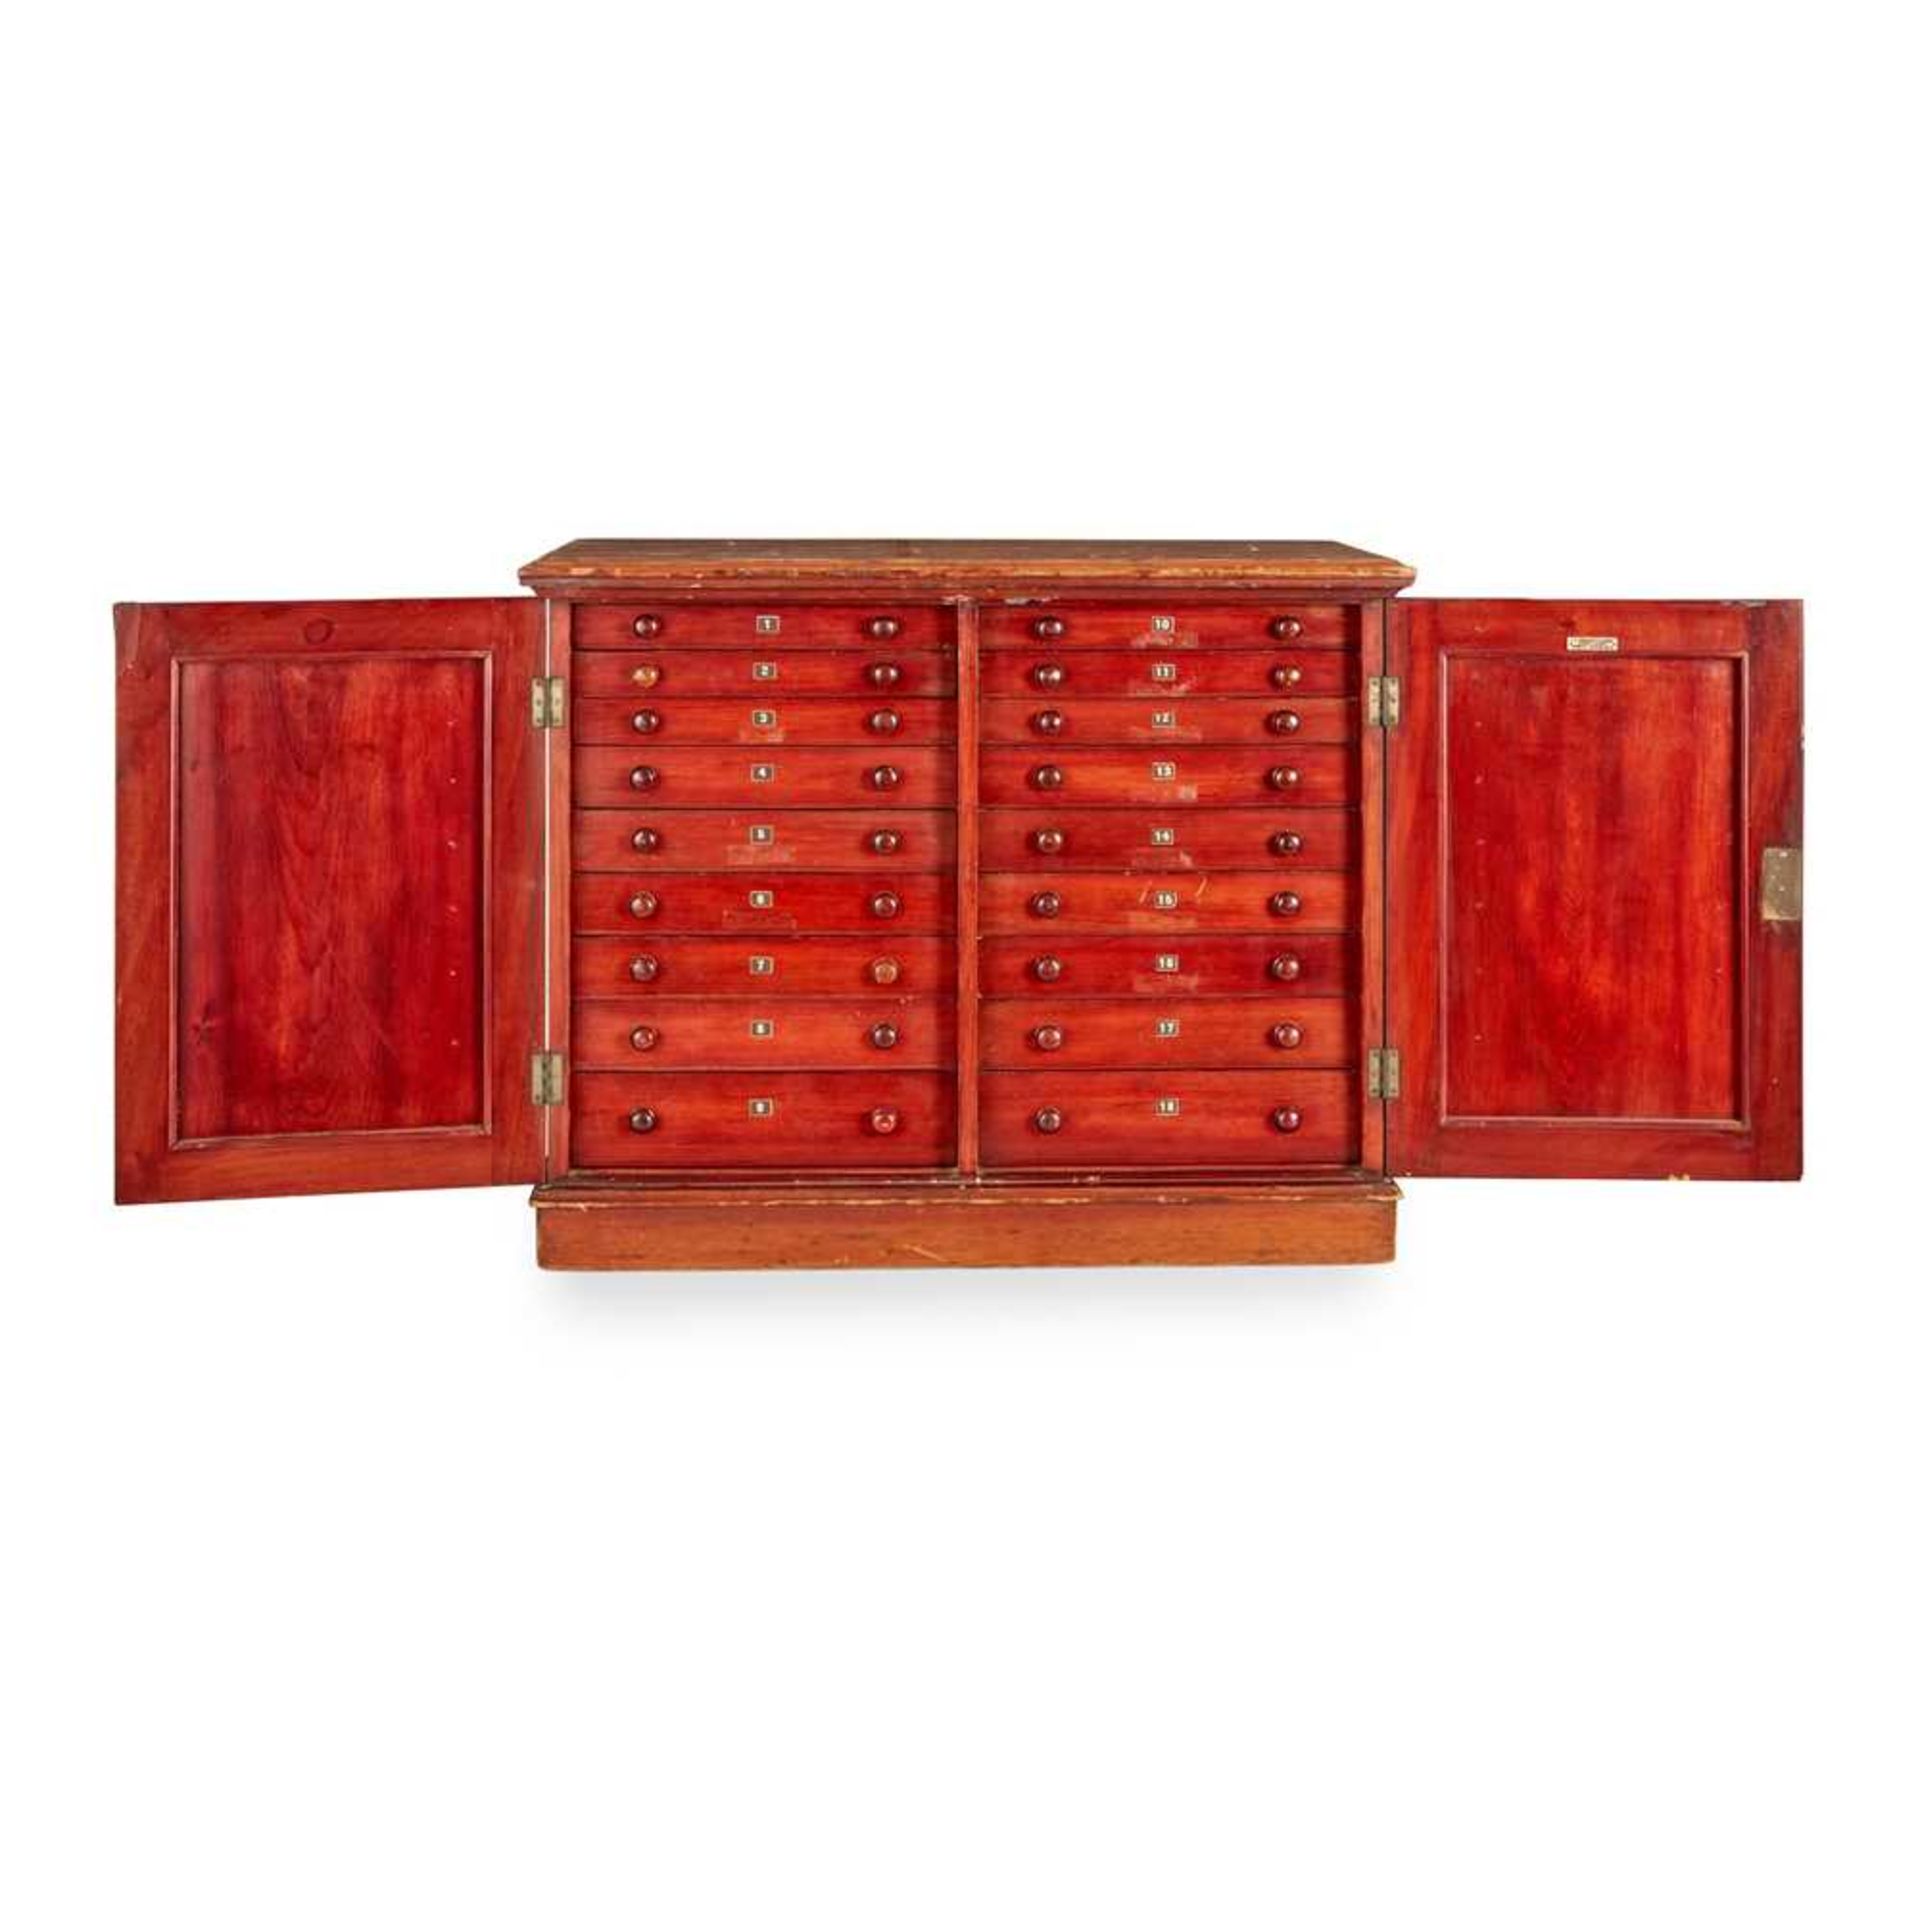 LATE VICTORIAN MAHOGANY MINERAL AND ROCK COLLECTOR'S CABINET LATE 19TH CENTURY - Image 2 of 7